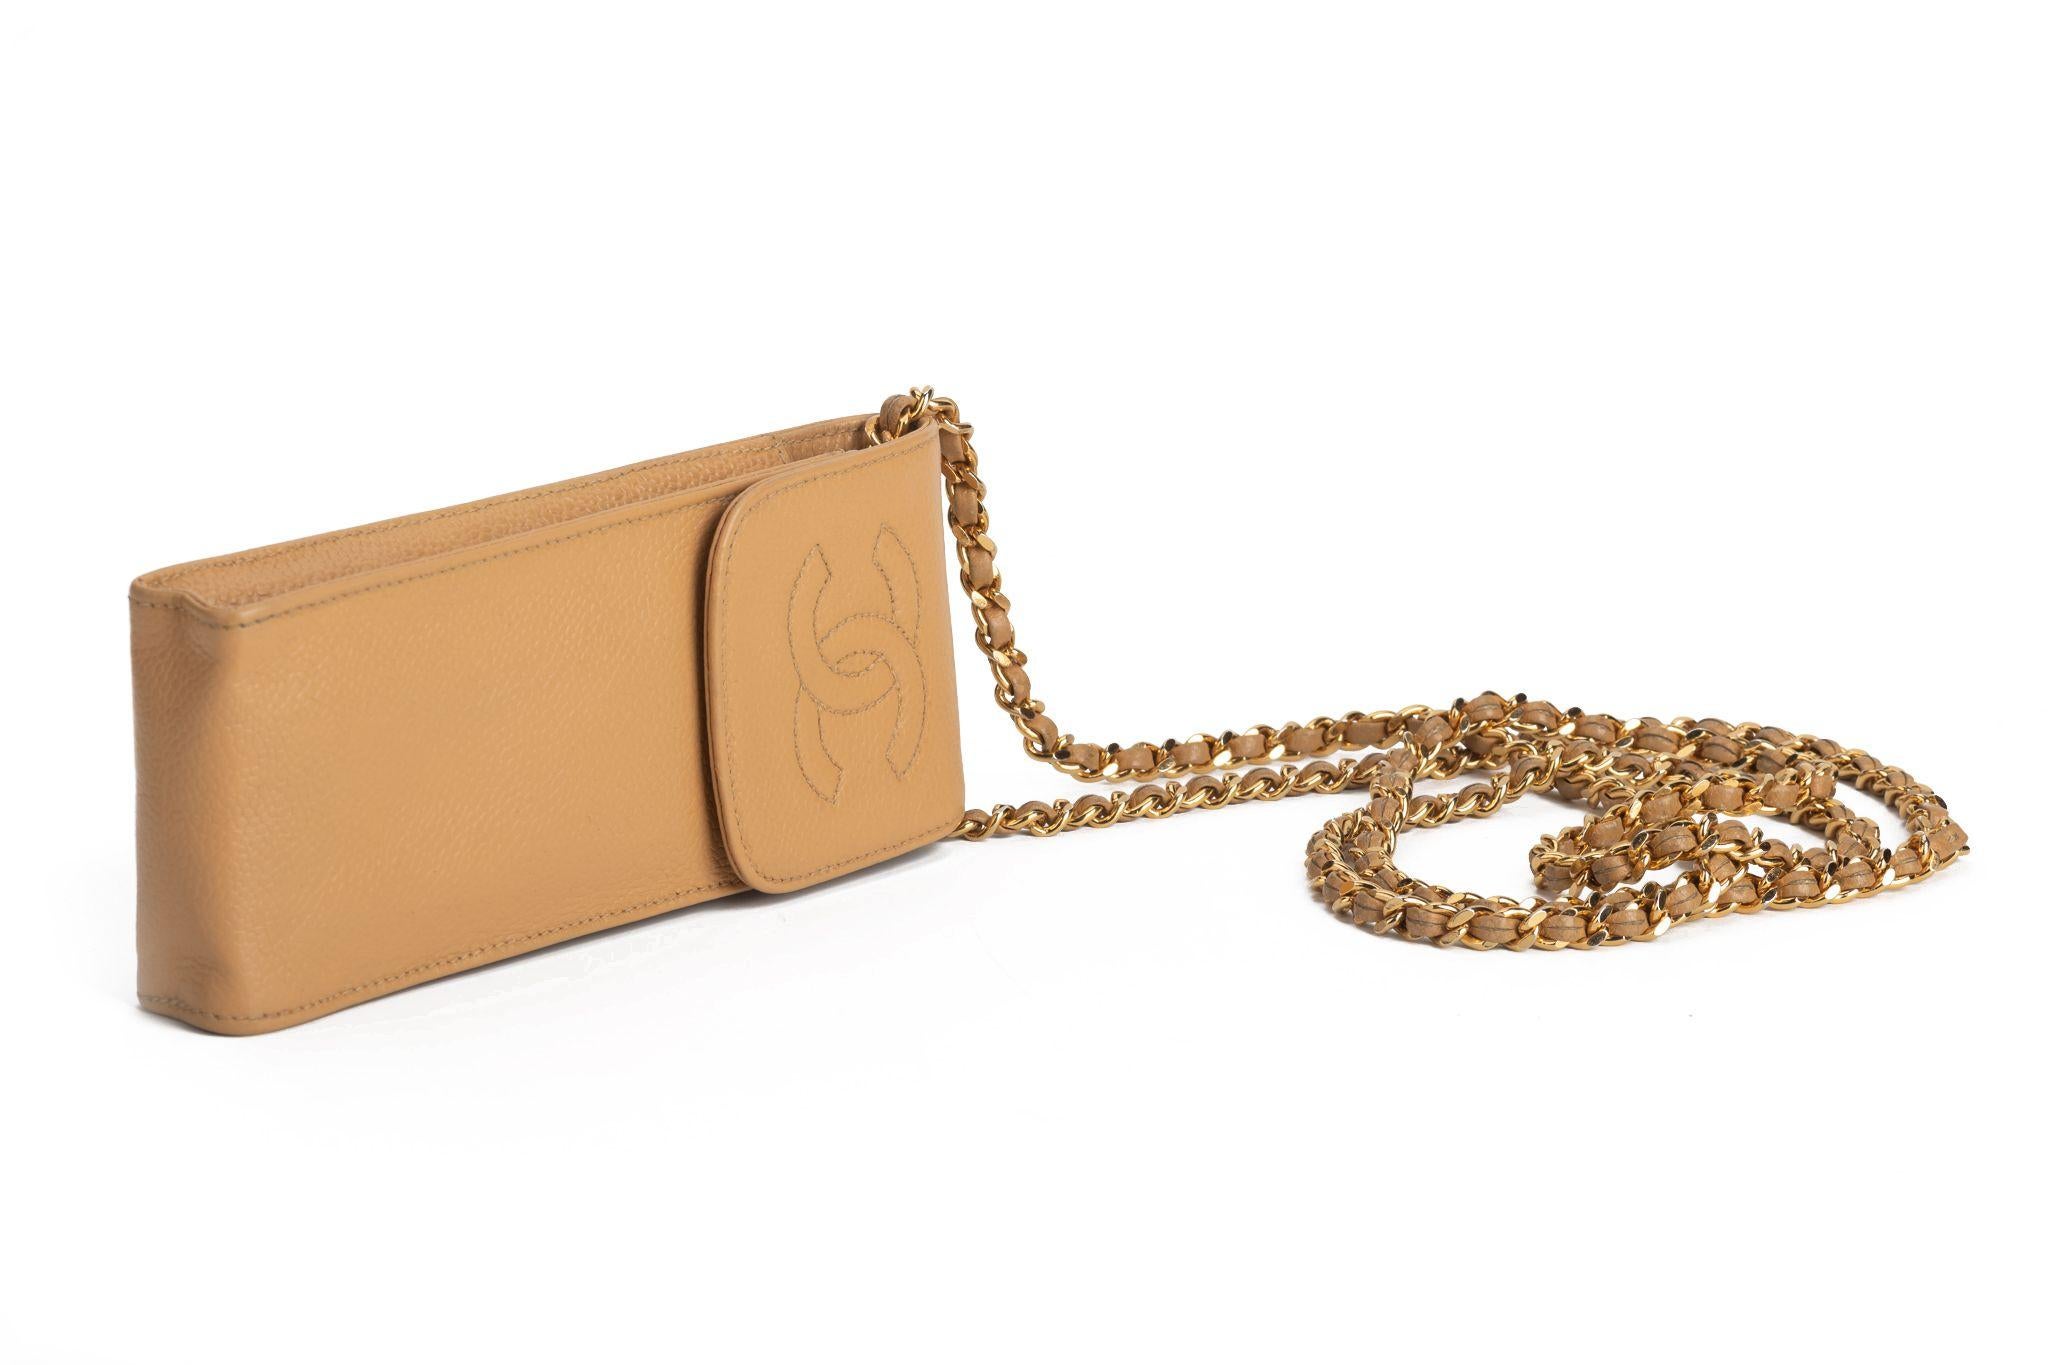 Chanel phone case necklace in beige. The bag is made of calfskin and on front if the flap is the typical CC logo imprinted. The piece comes with a chain and can be worn as a necklace or crossbody bag. It is in excellent condition and comes with a